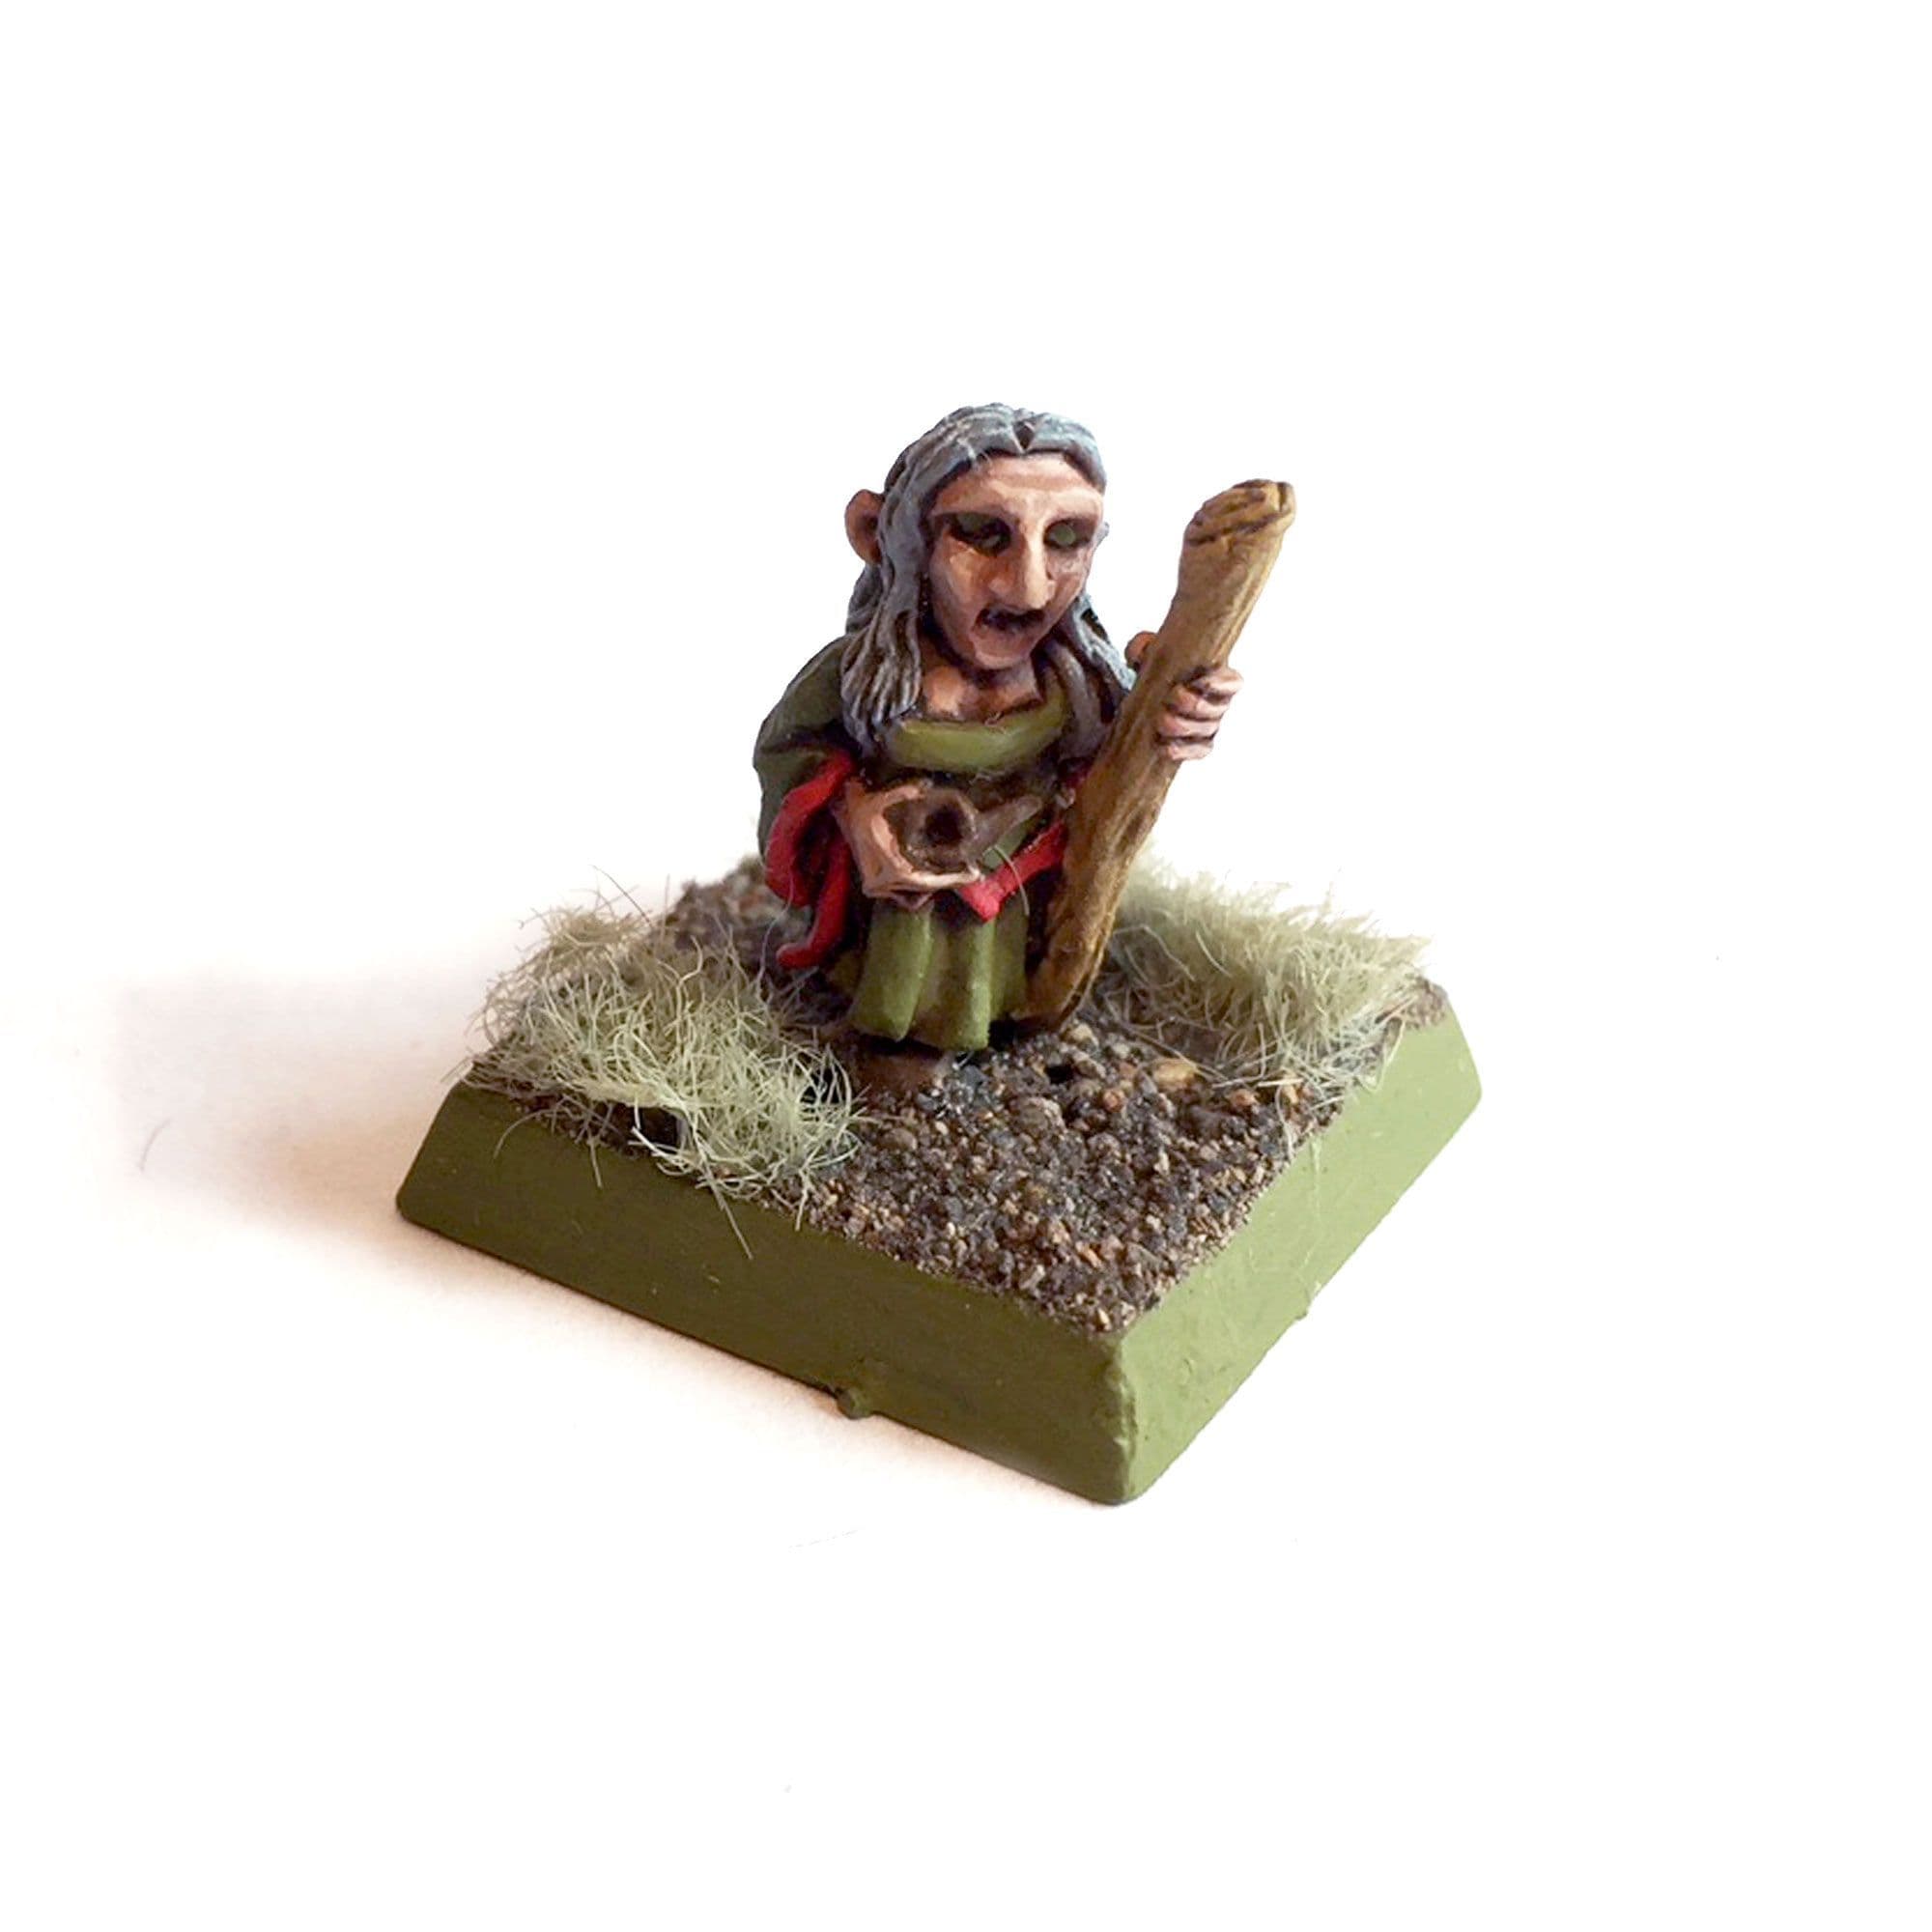 Gnome Druid - Fengles Dungeons and Dragons Miniature DnD is a